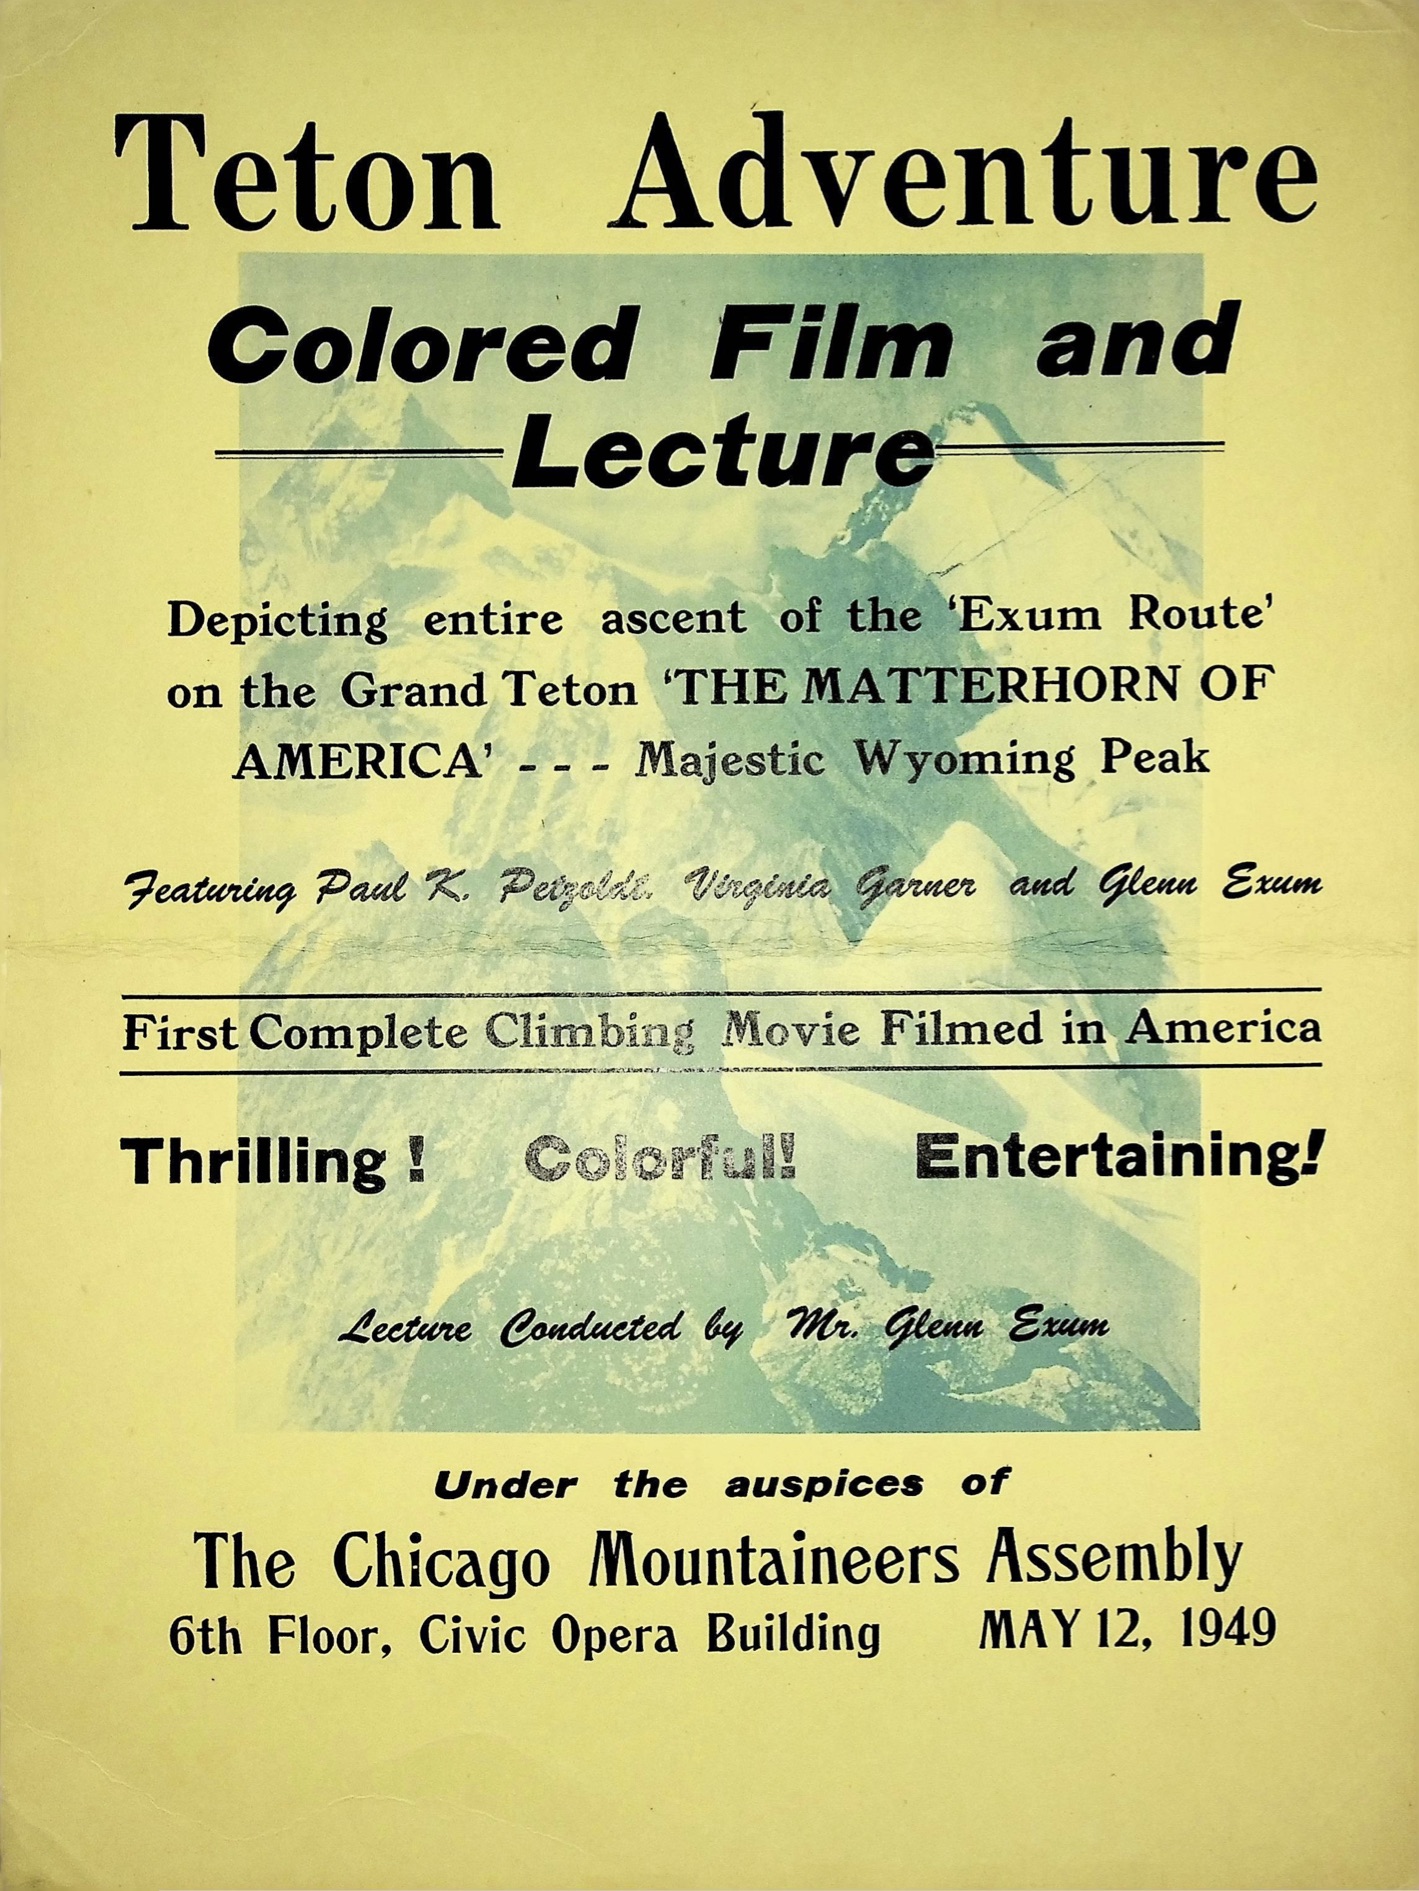 Flyer for a Showing of the Film and a Lecture by Glenn Exum